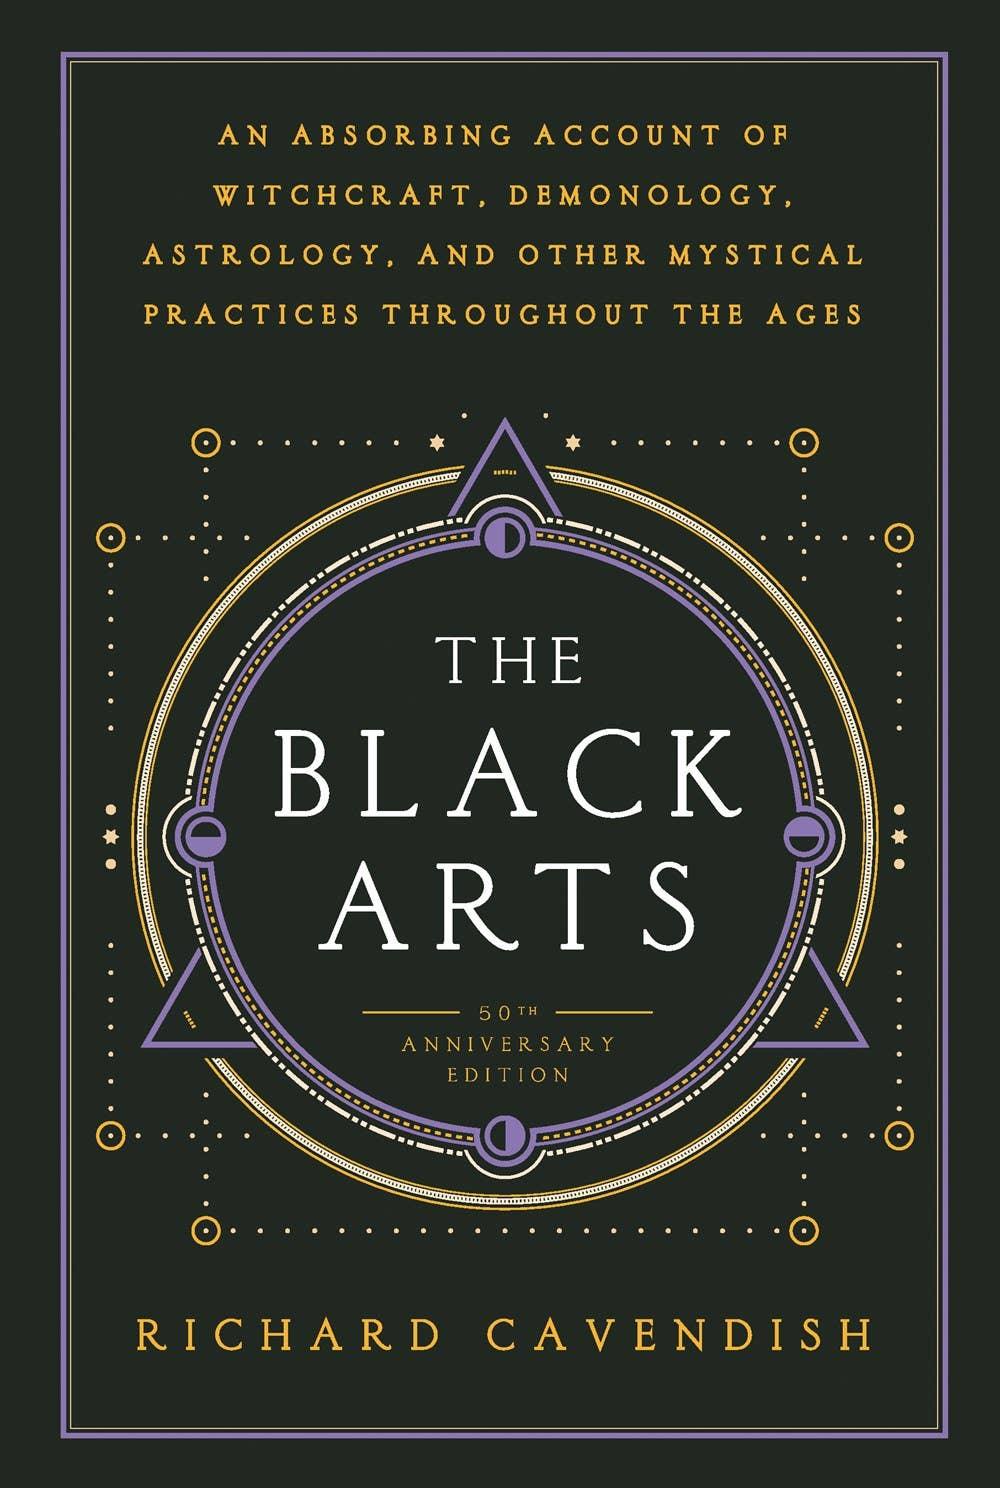 Black Arts: History of Witchcraft, Demonology, Astrology - Esme and Elodie